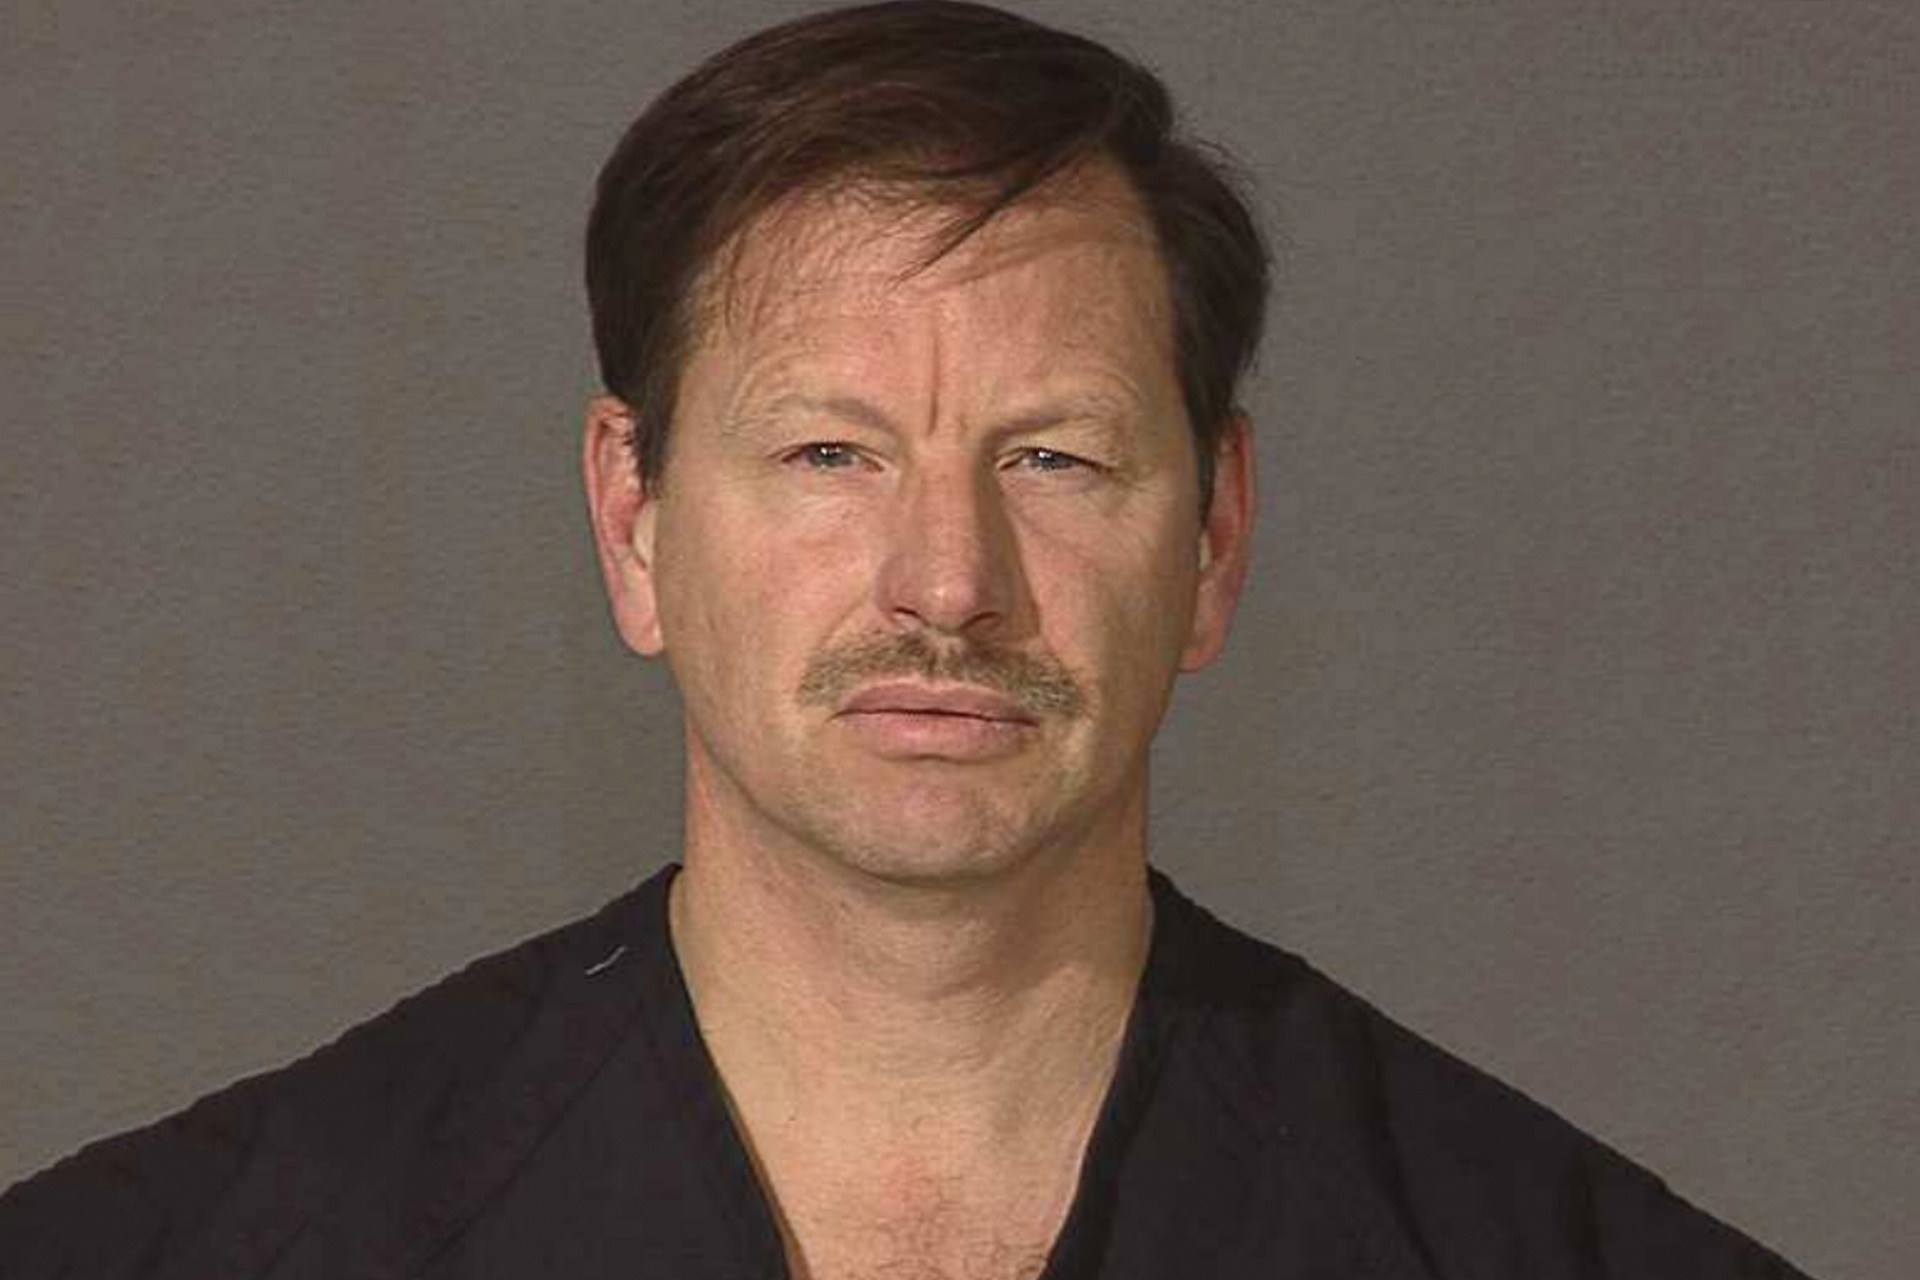 Gary ridgway the gruesome story of the green river killer thought catalog